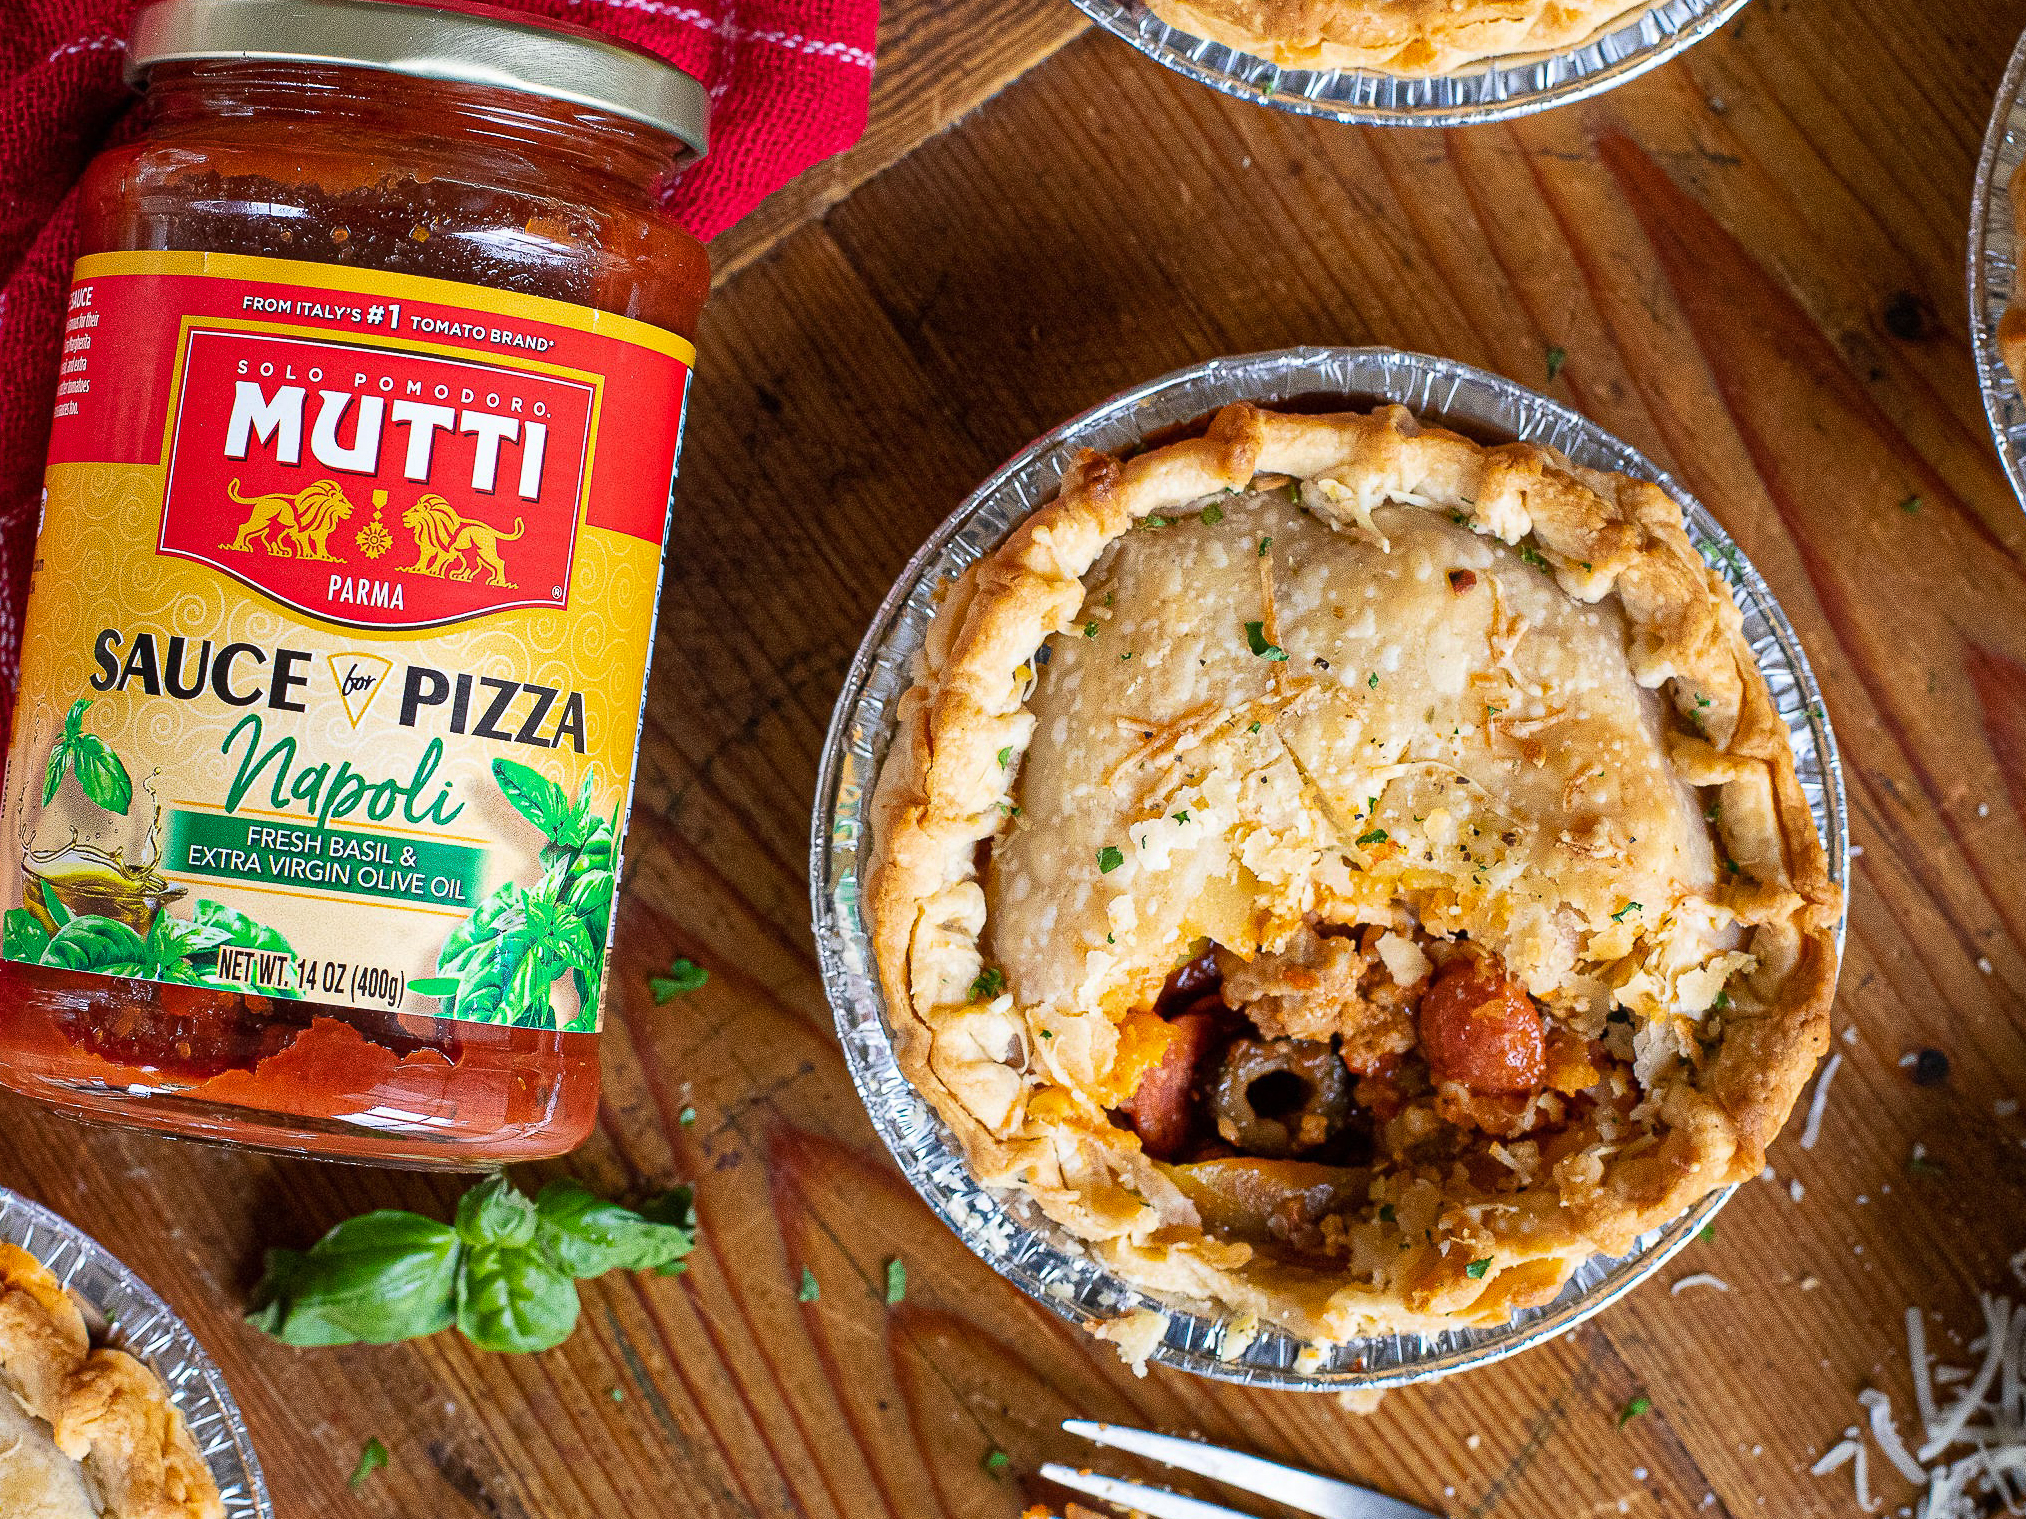 Loaded Pizza Pot Pies Are The Perfect Recipe To Go With The Mutti Sauce For Pizza Coupon! on I Heart Publix 2